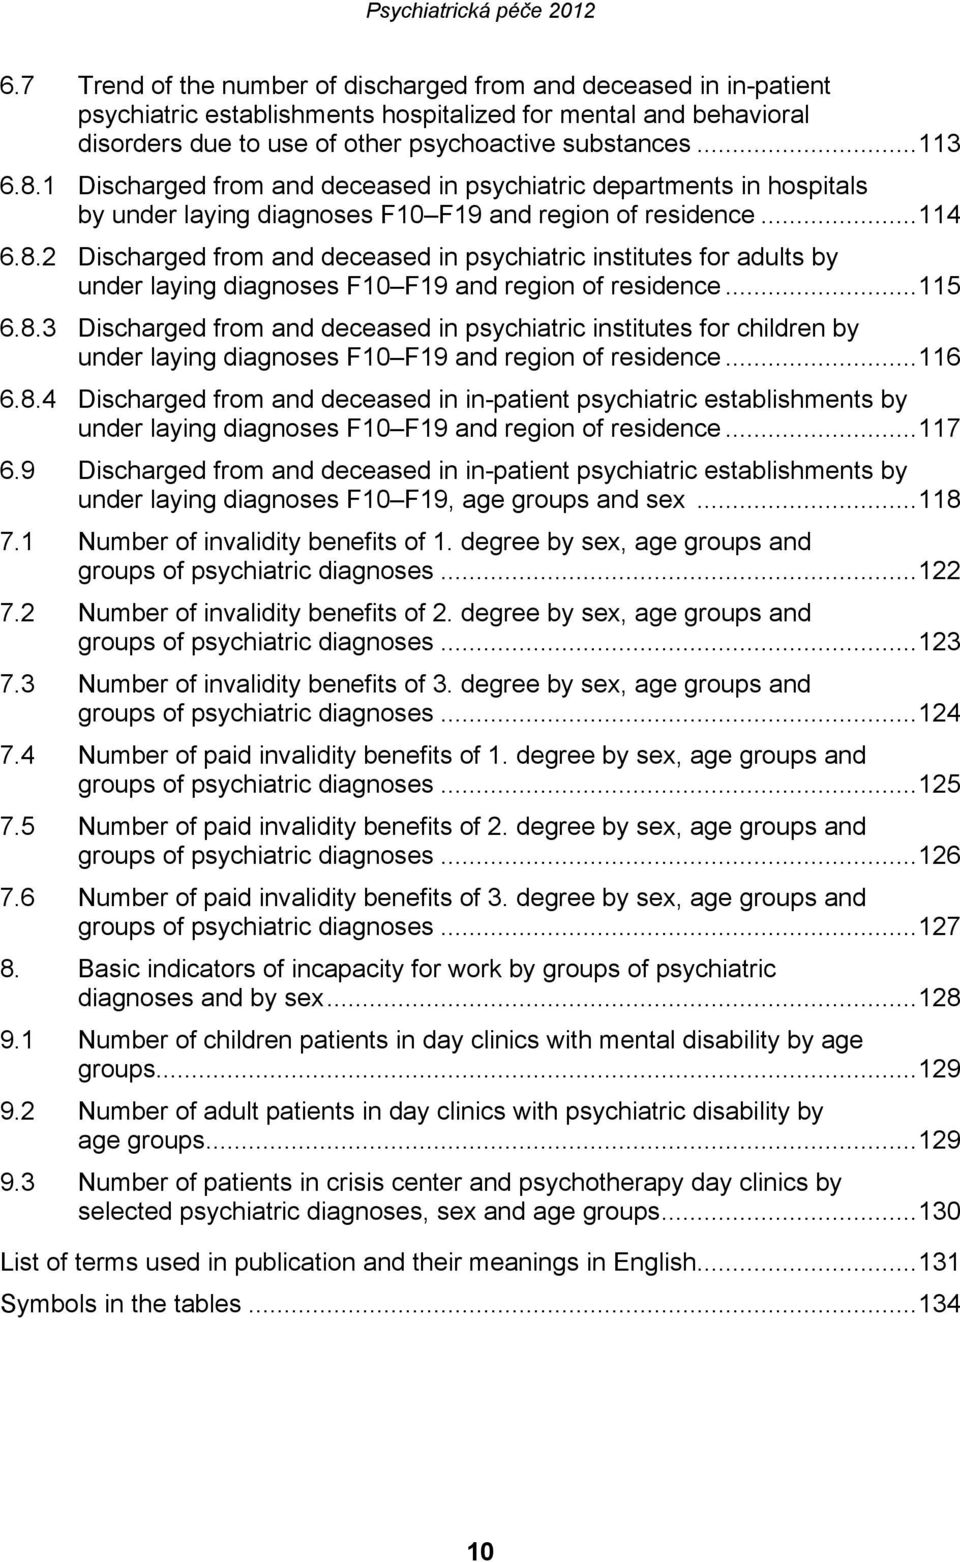 .. 115 6.8.3 Discharged from and deceased in psychiatric institutes for children by under laying diagnoses F10 F19 and region of residence... 116 6.8.4 Discharged from and deceased in in-patient psychiatric establishments by under laying diagnoses F10 F19 and region of residence.